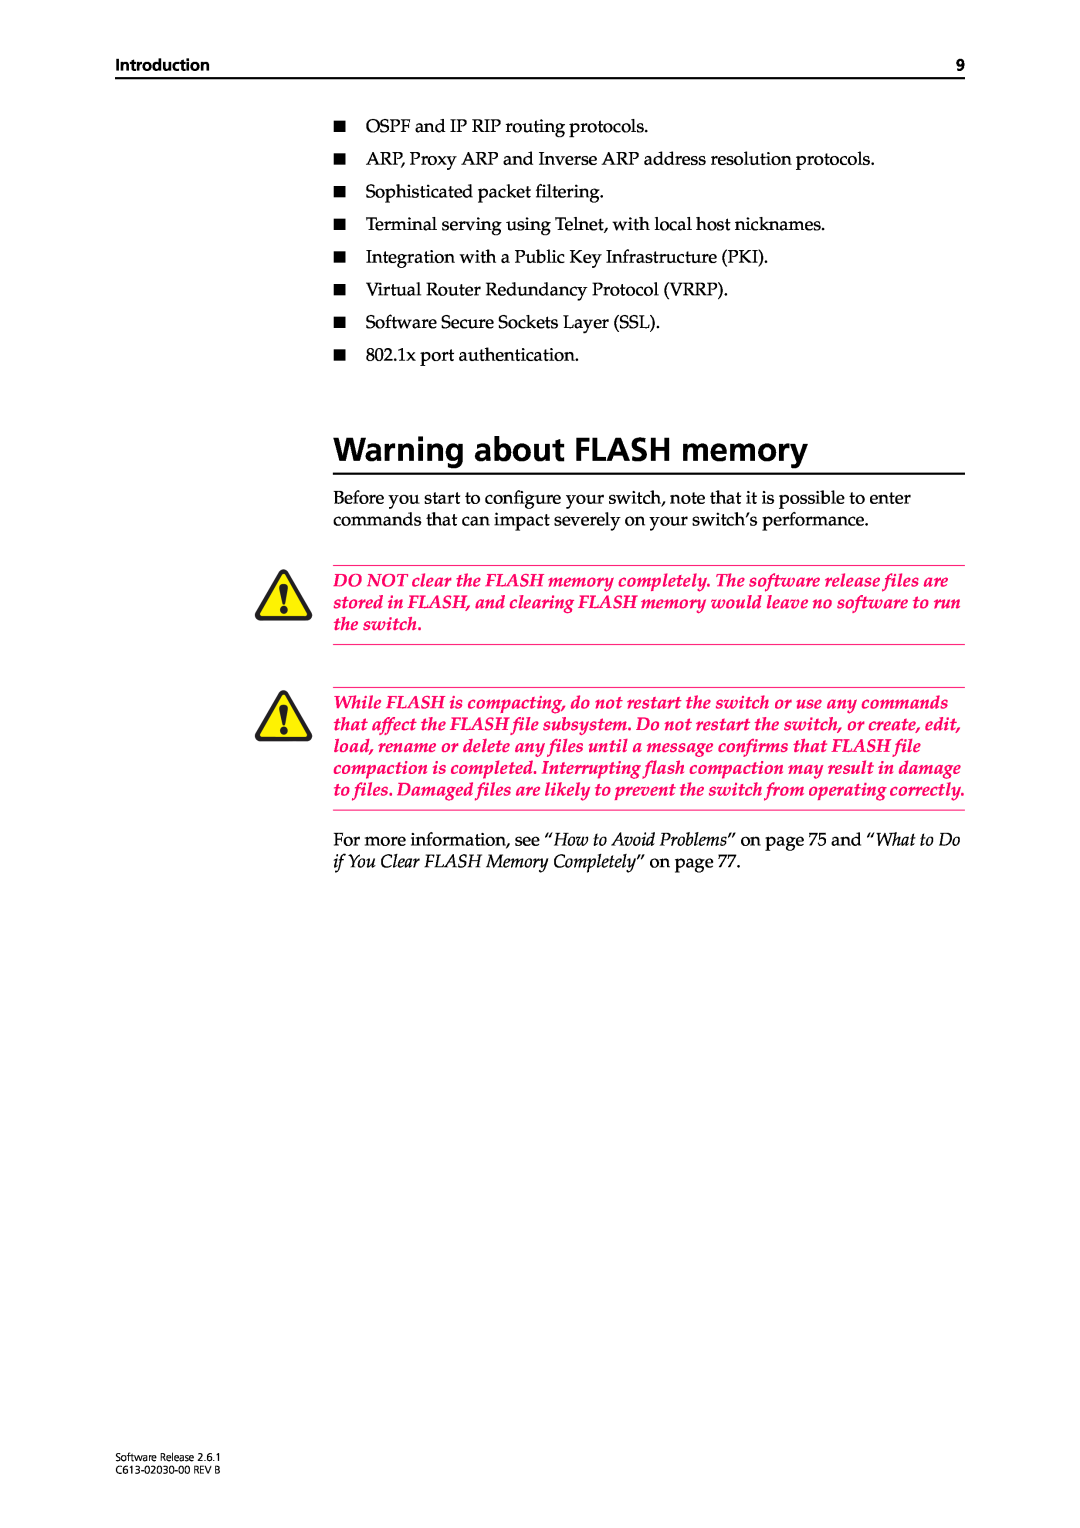 Allied Telesis at-8700xl series switch manual Warning about FLASH memory 